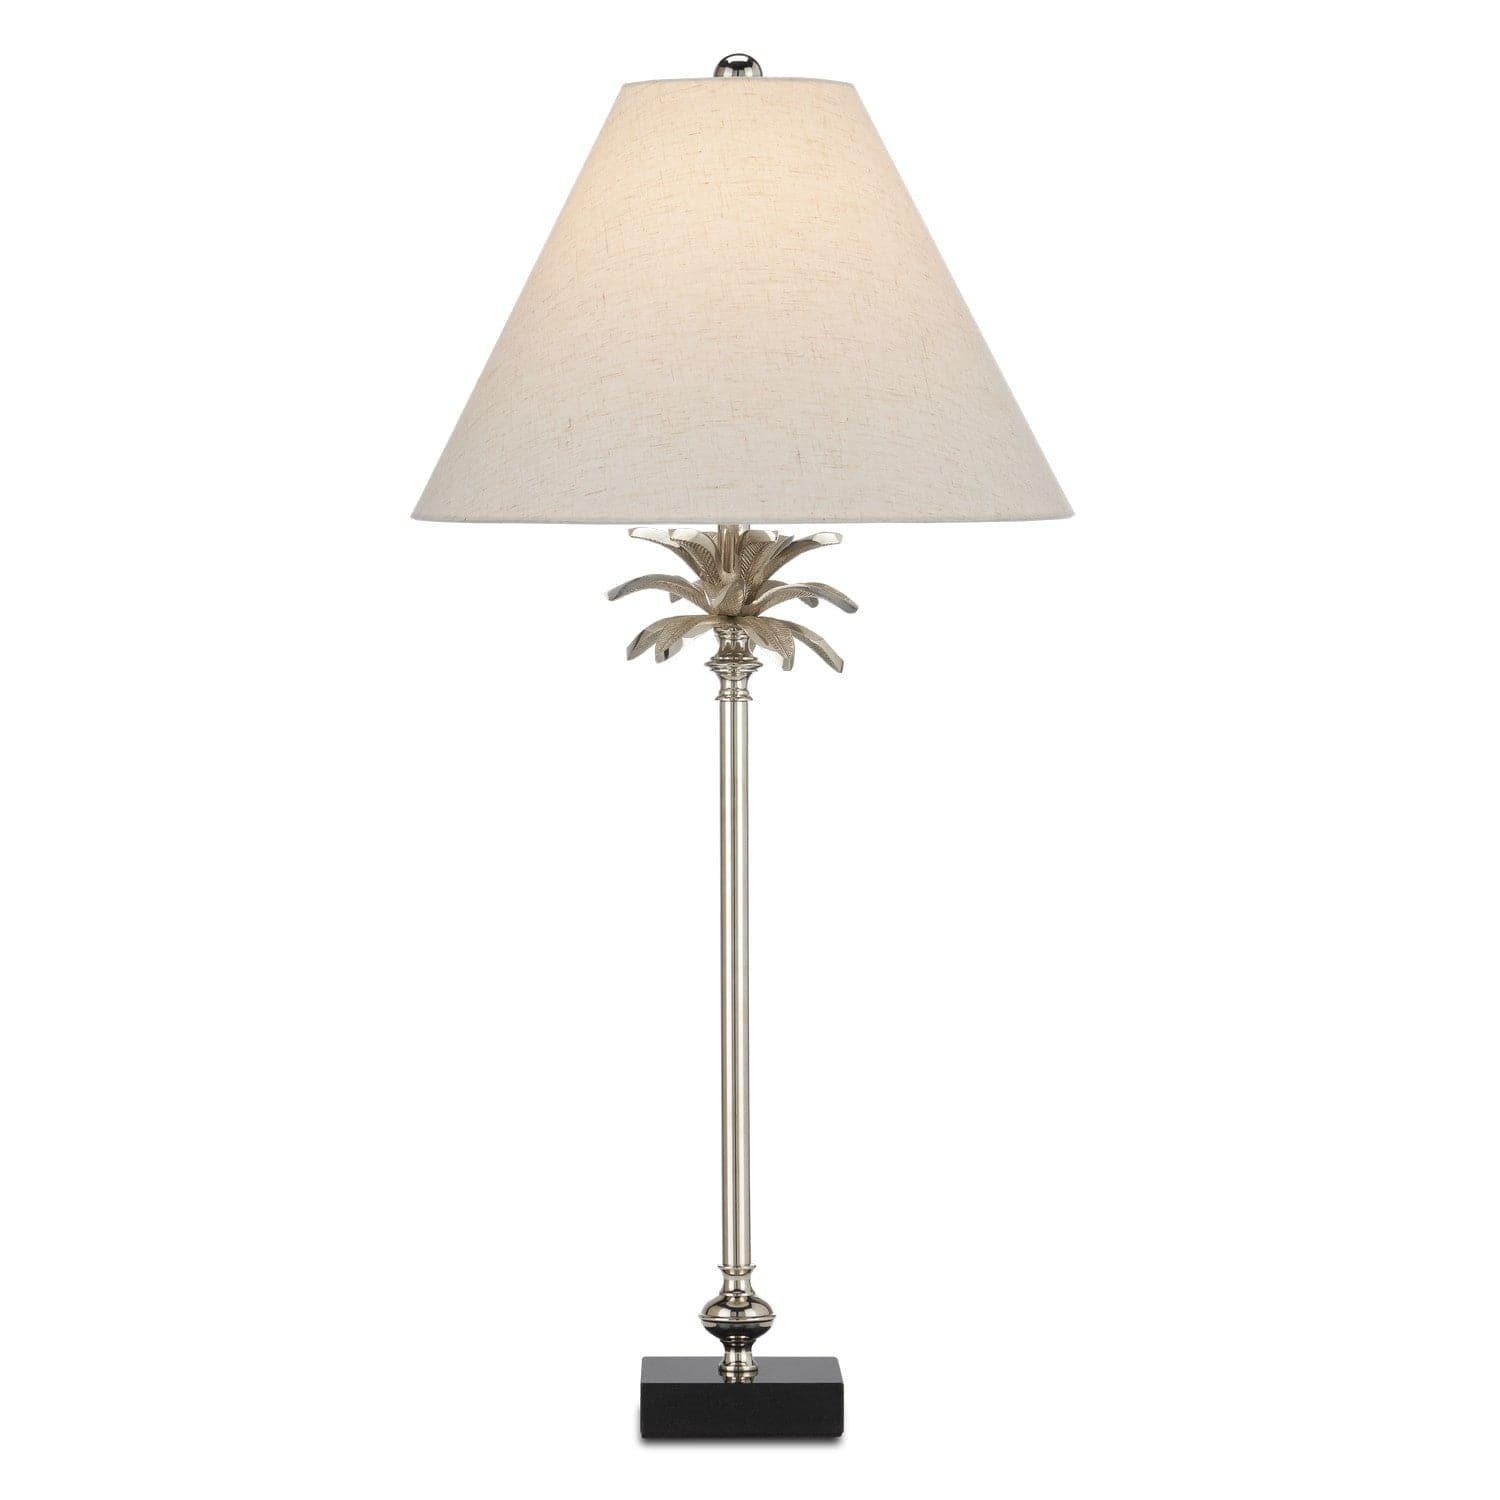 Currey and Company - 6000-0860 - One Light Table Lamp - Polished Nickel/Black